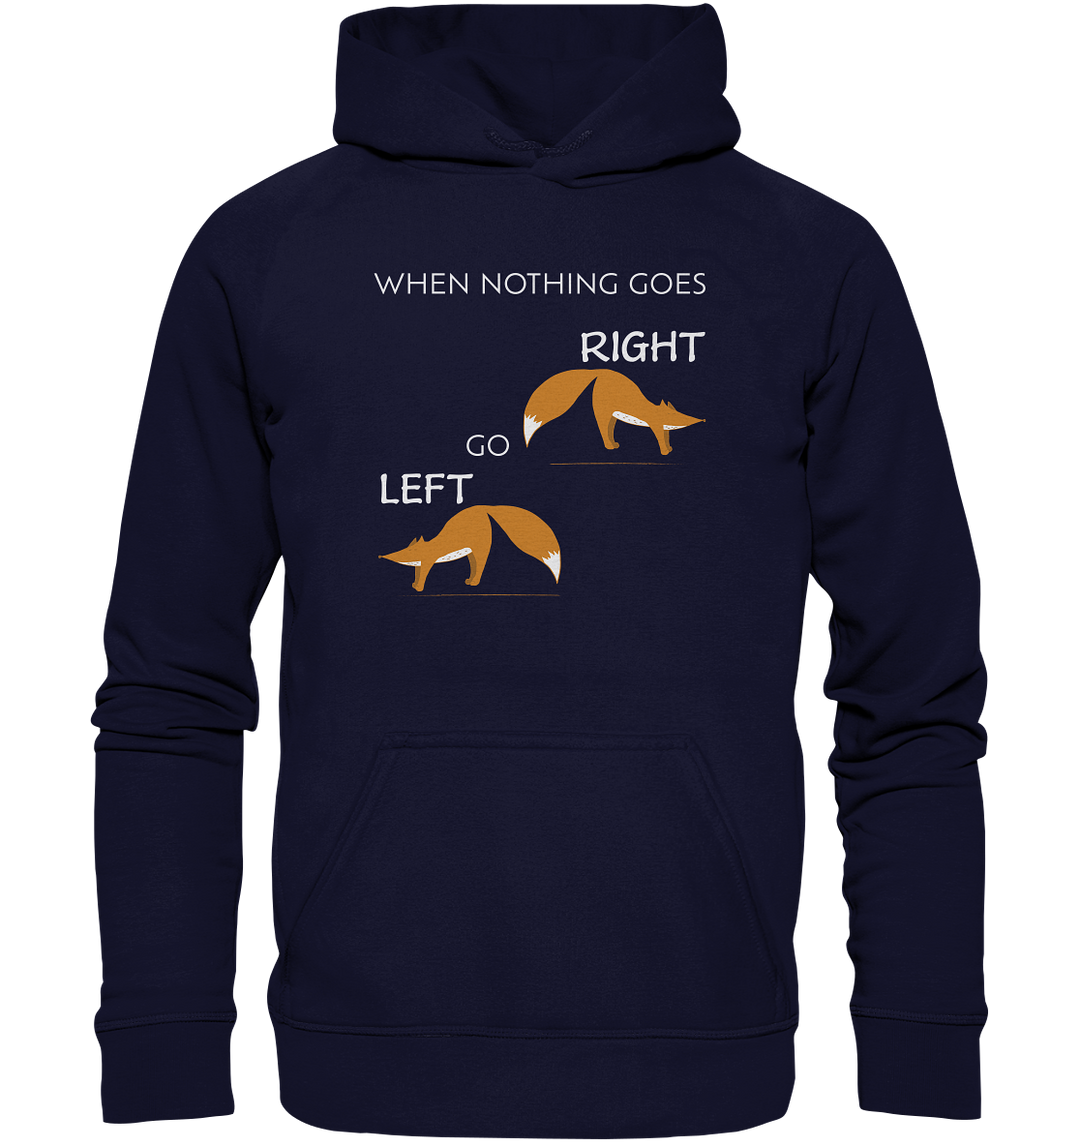 NOTHING GOES RIGHT - Hoodie Unisex